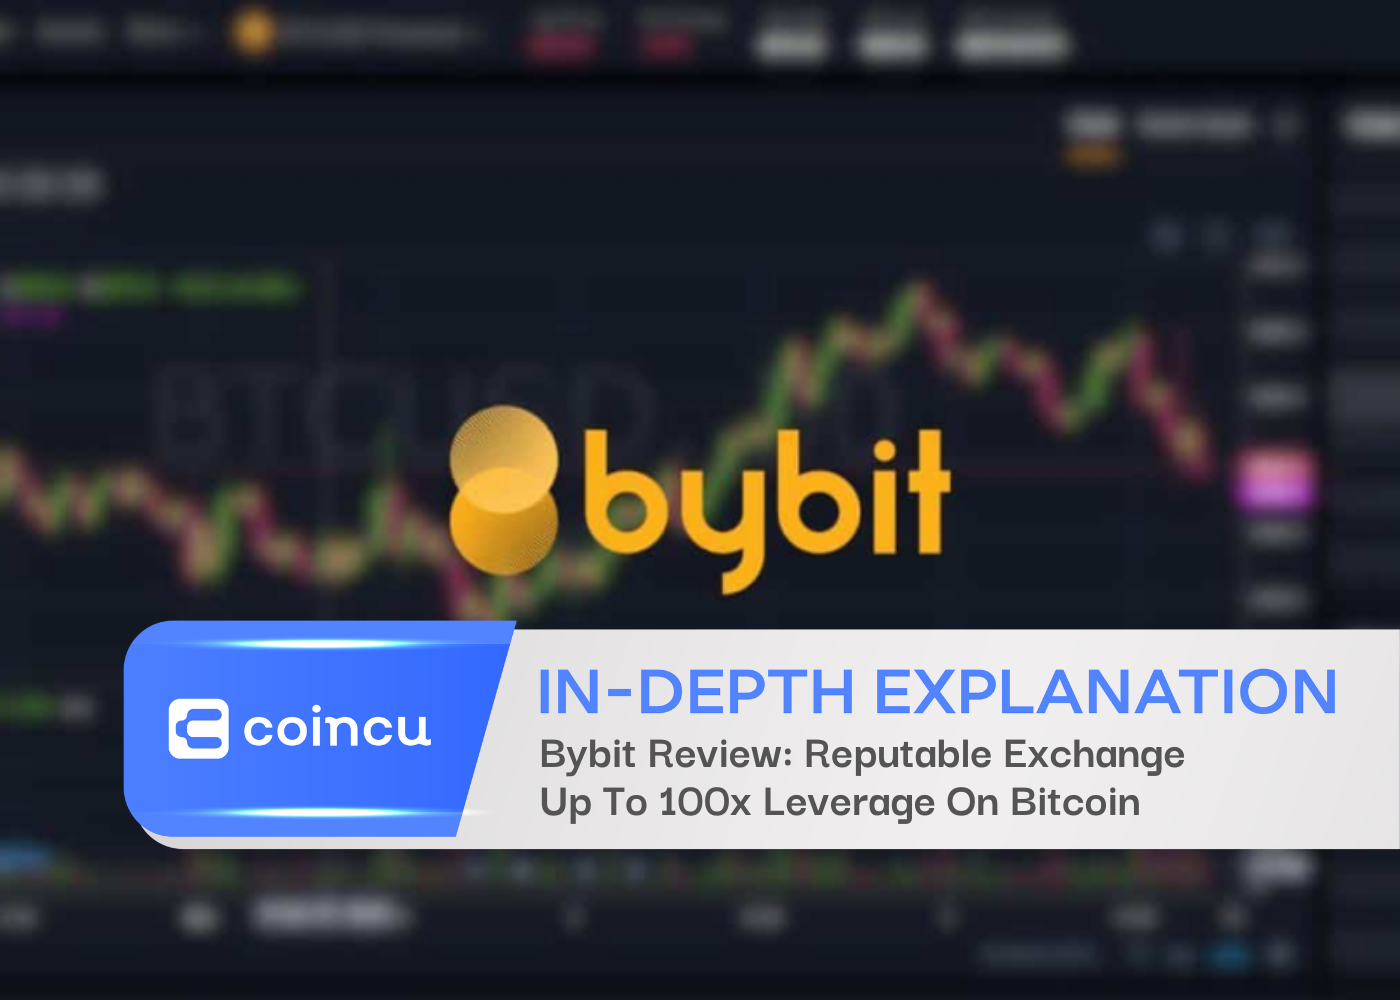 Bybit Review: Reputable Exchange, Up To 100x Leverage On Bitcoin